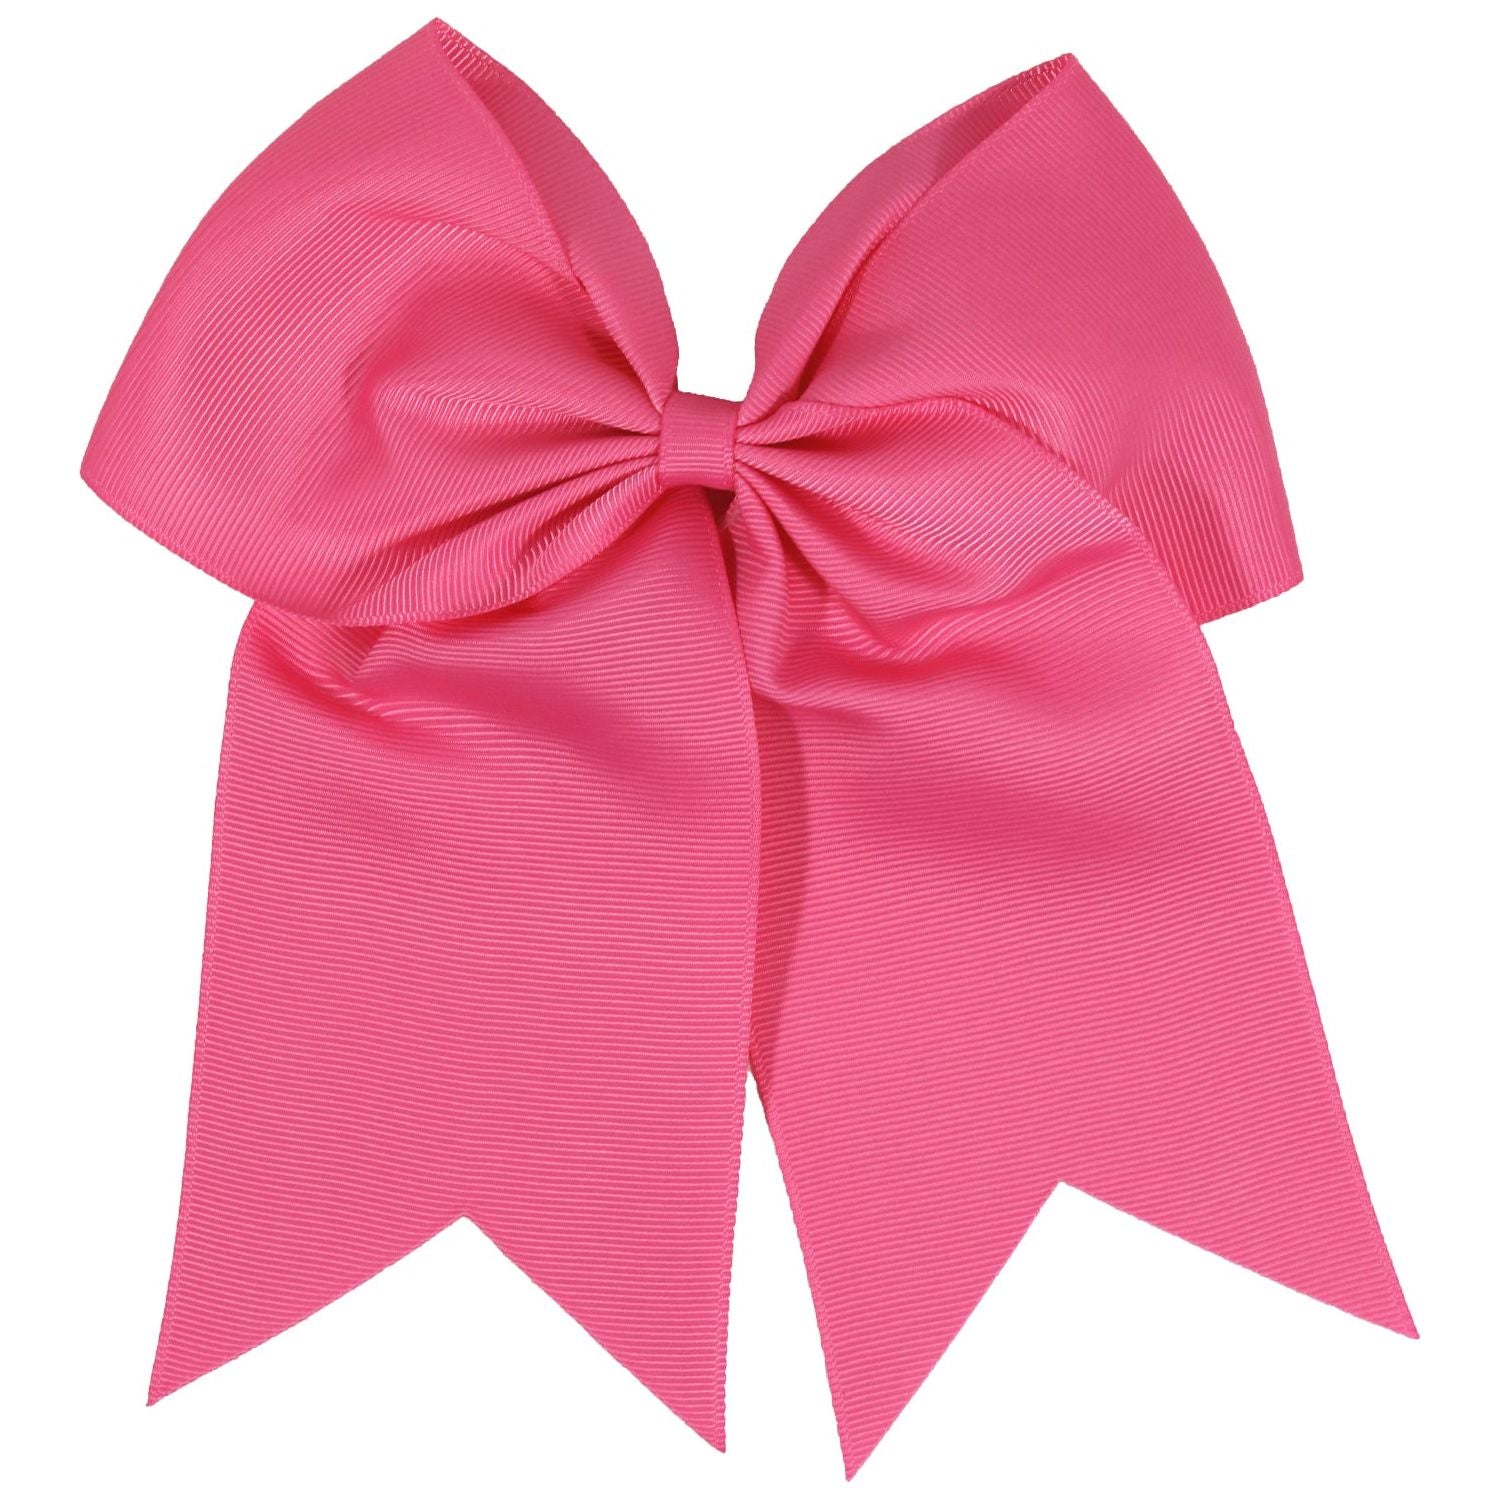 7'' Breast Cancer Cheer Bows Pink Glitter Hair Bow With Elastic Hair band  For Girls Kids Hair Accessories Headwear Free Shipping - AliExpress